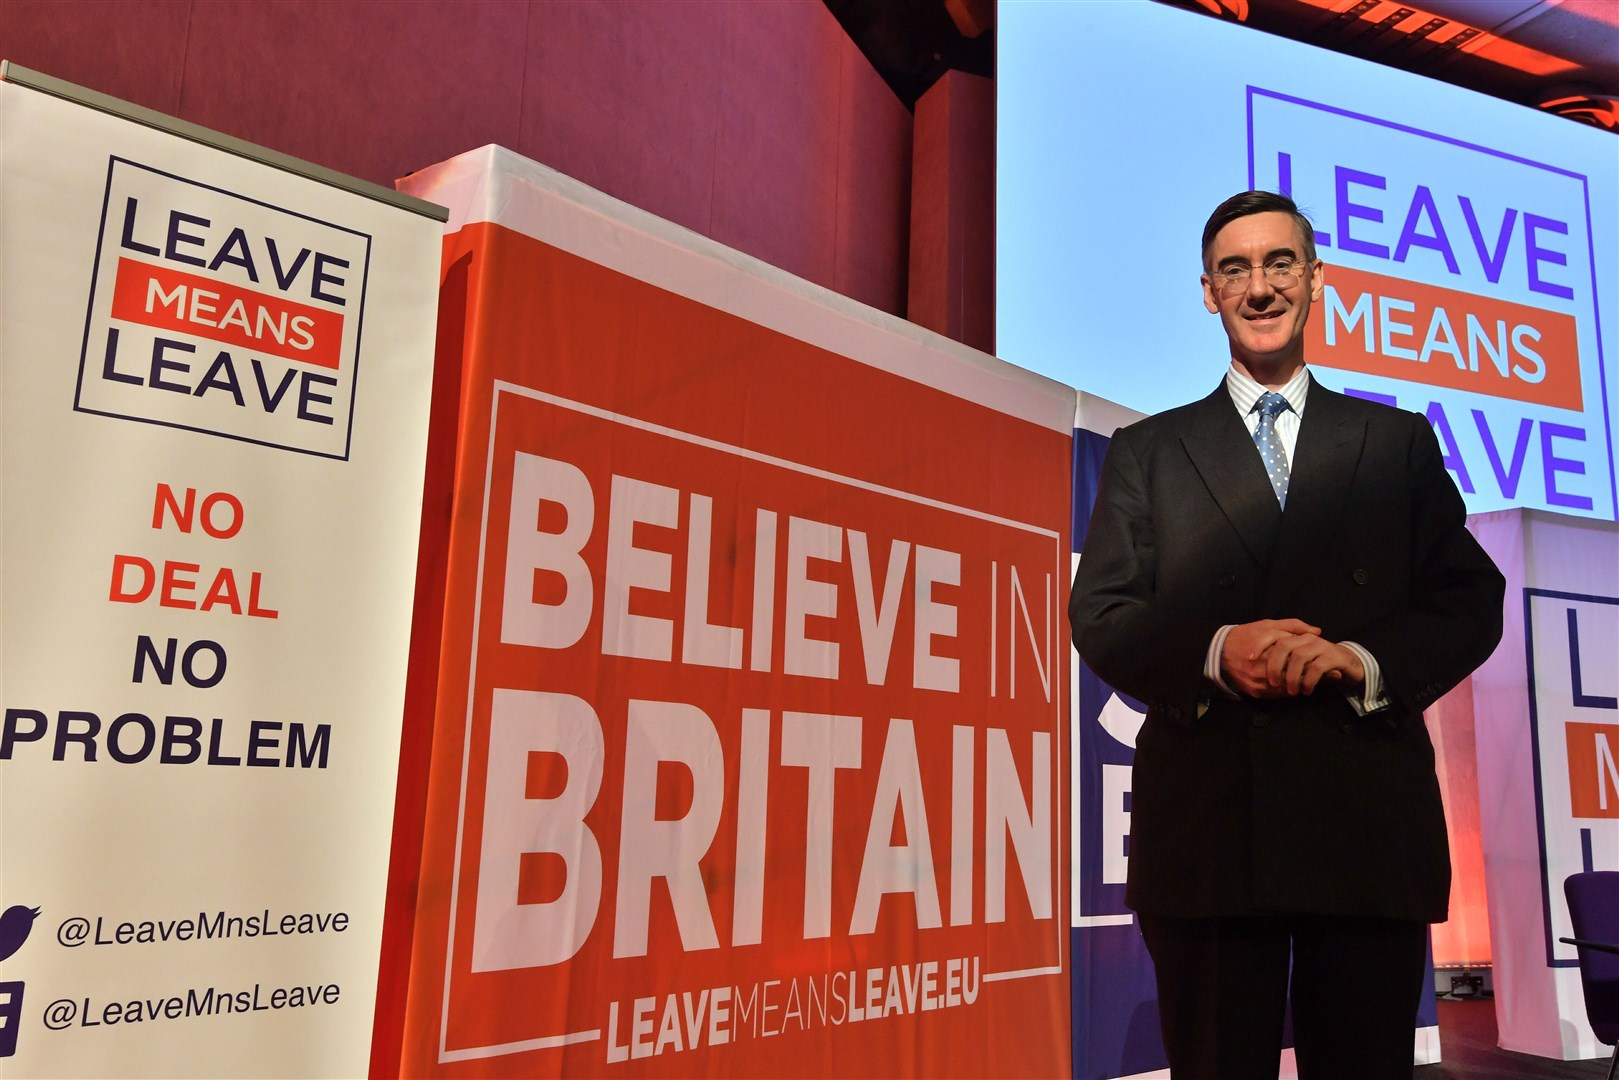 Jacob Rees-Mogg was a key figure in the Leave campaign (John Stilwell/PA)